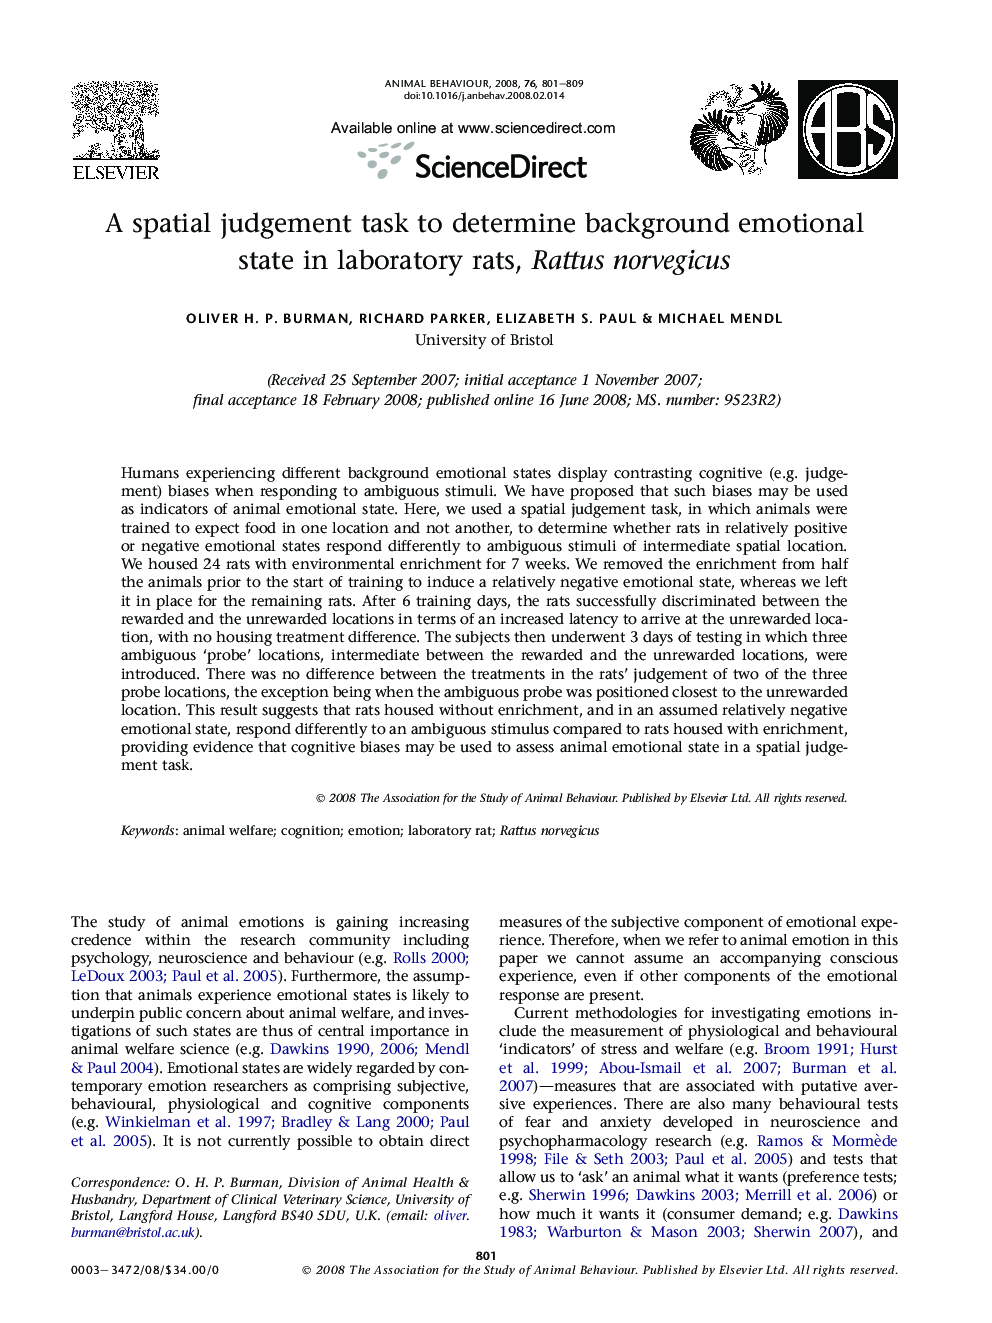 A spatial judgement task to determine background emotional state in laboratory rats, Rattus norvegicus